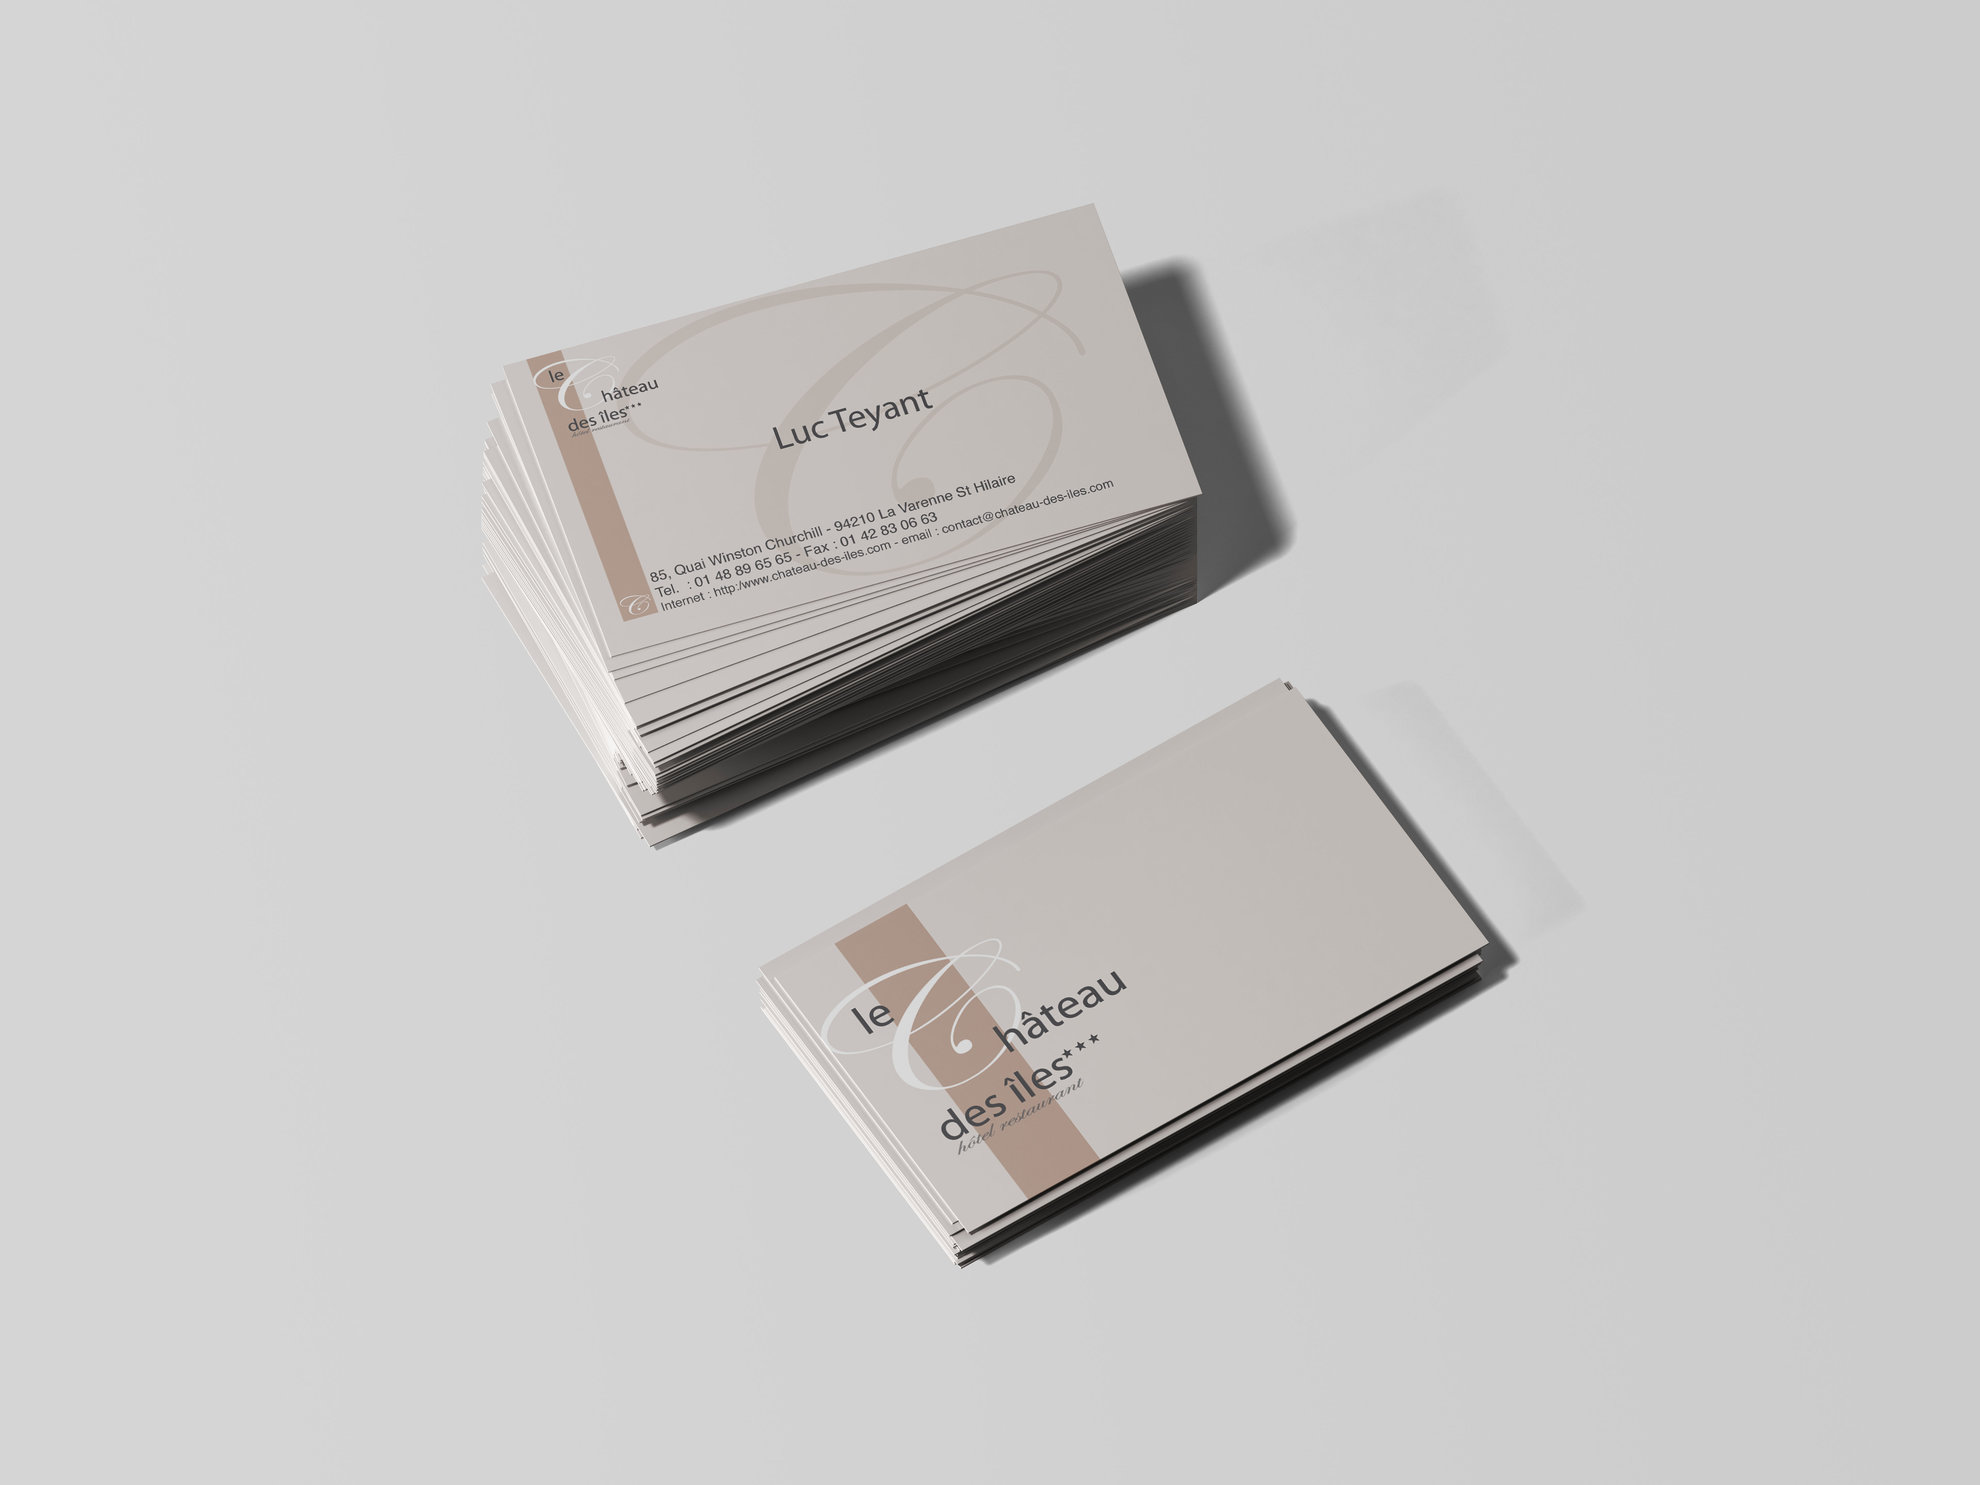 chateauBranding Business Cards Mockup.jpg